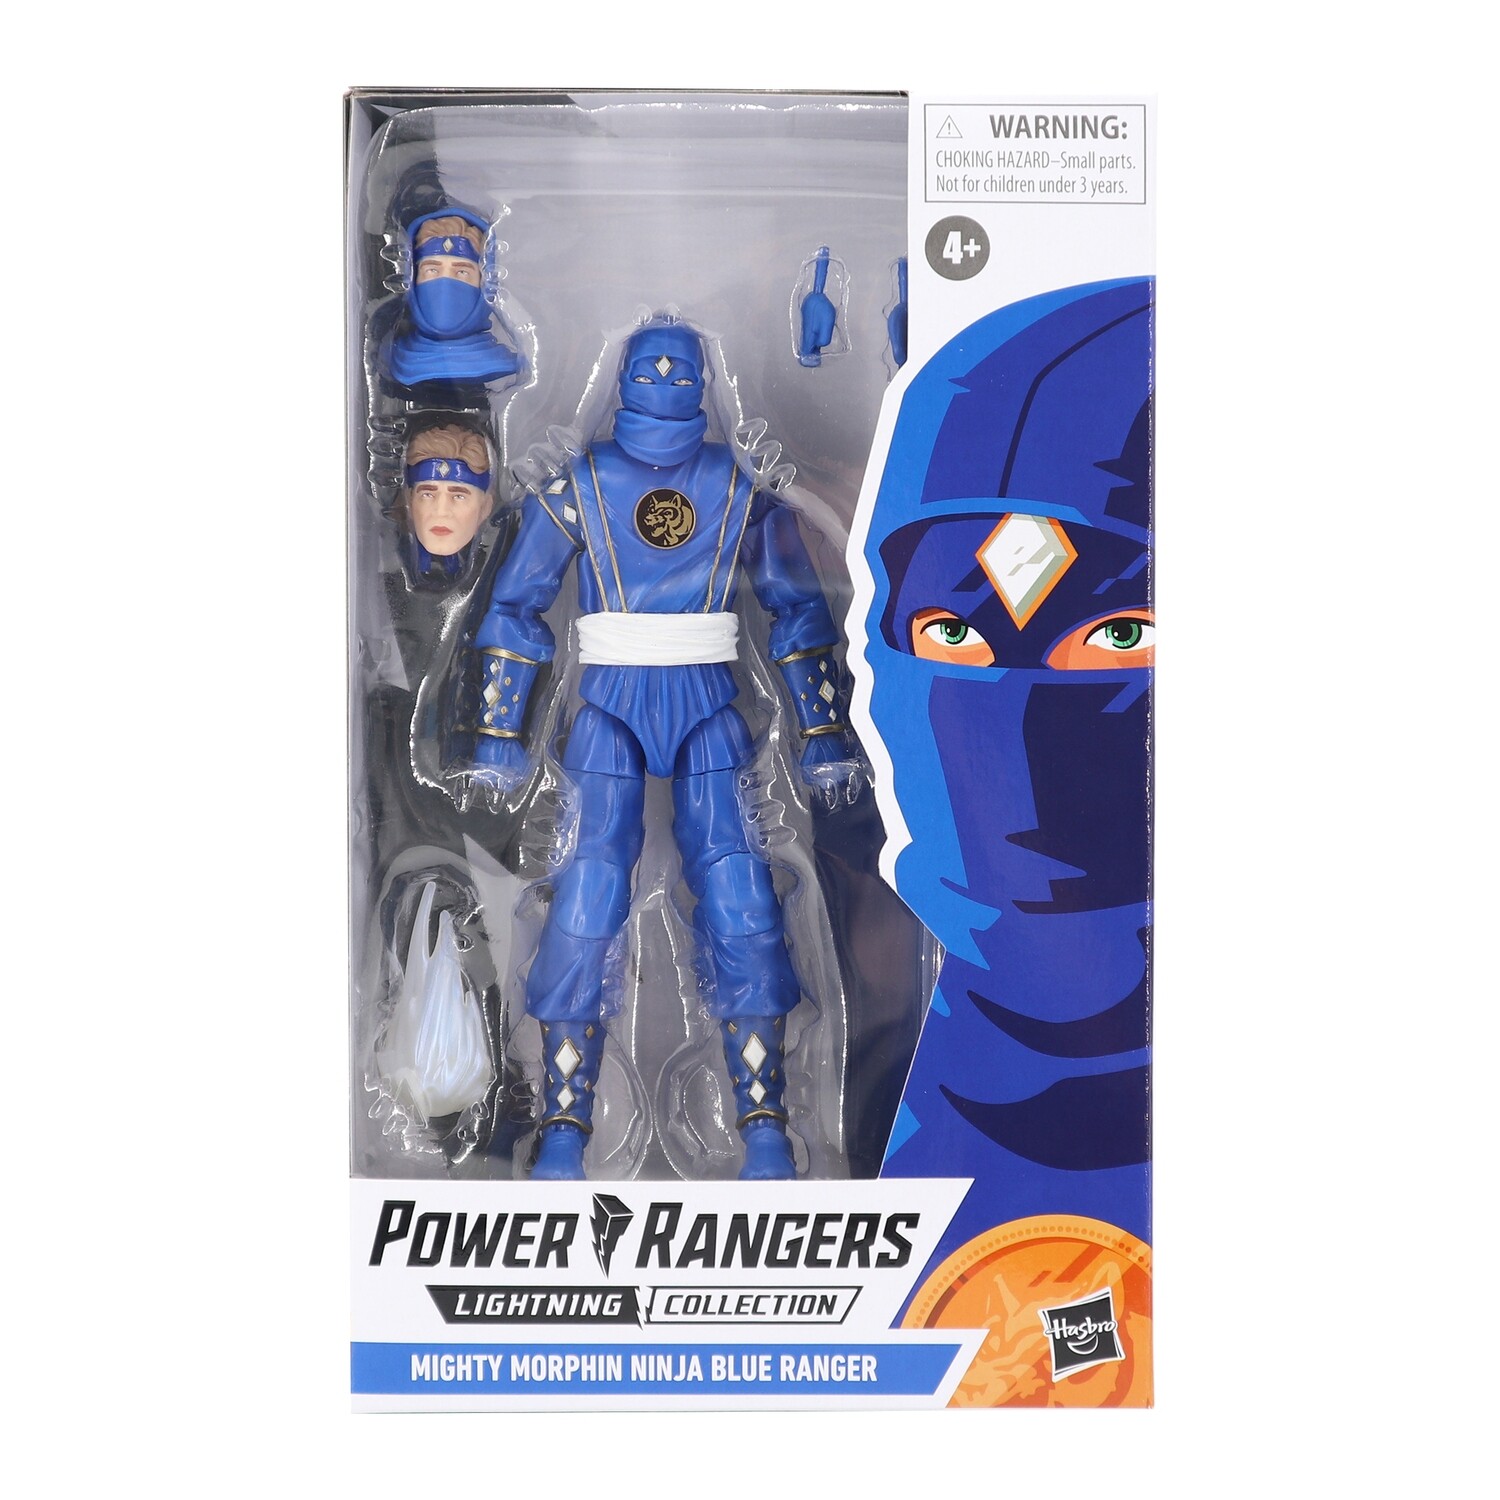 Power Rangers Lightning Collection 6-Inch Action Figure - Monsters Mighty Morphin Ninja Blue Ranger [damaged box]